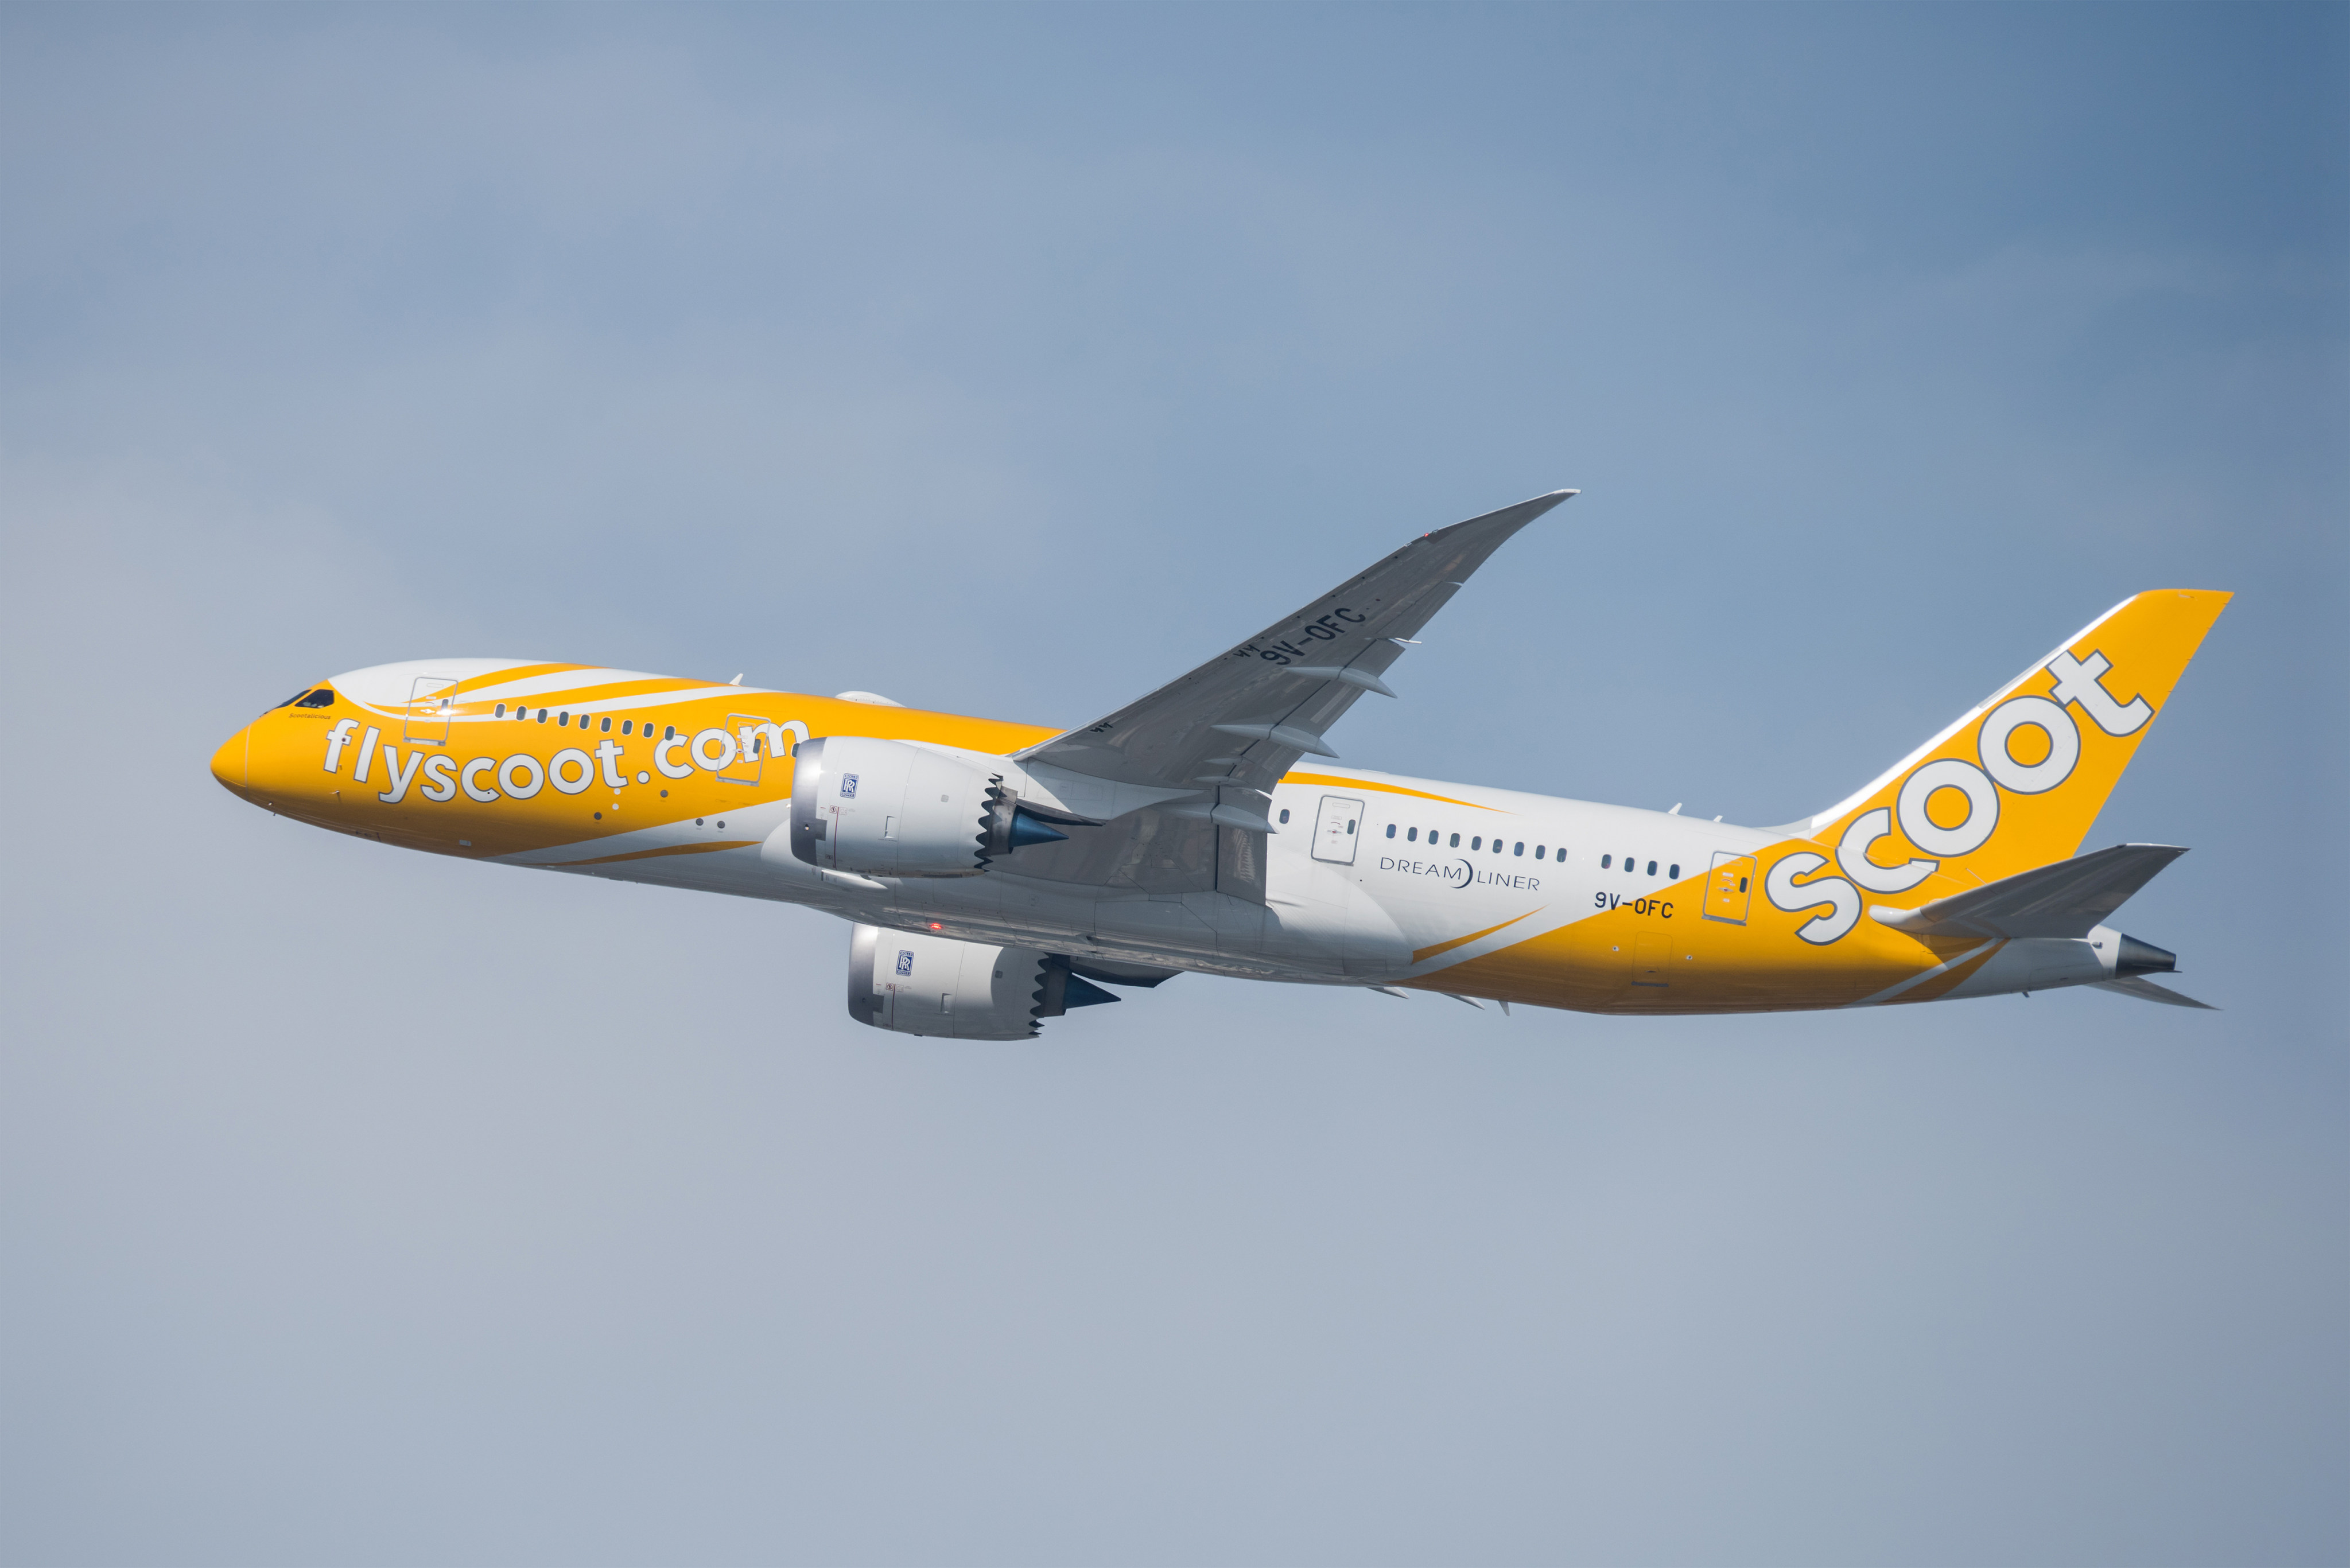 A Scoot Airlines flight. Photo: Shutterstock